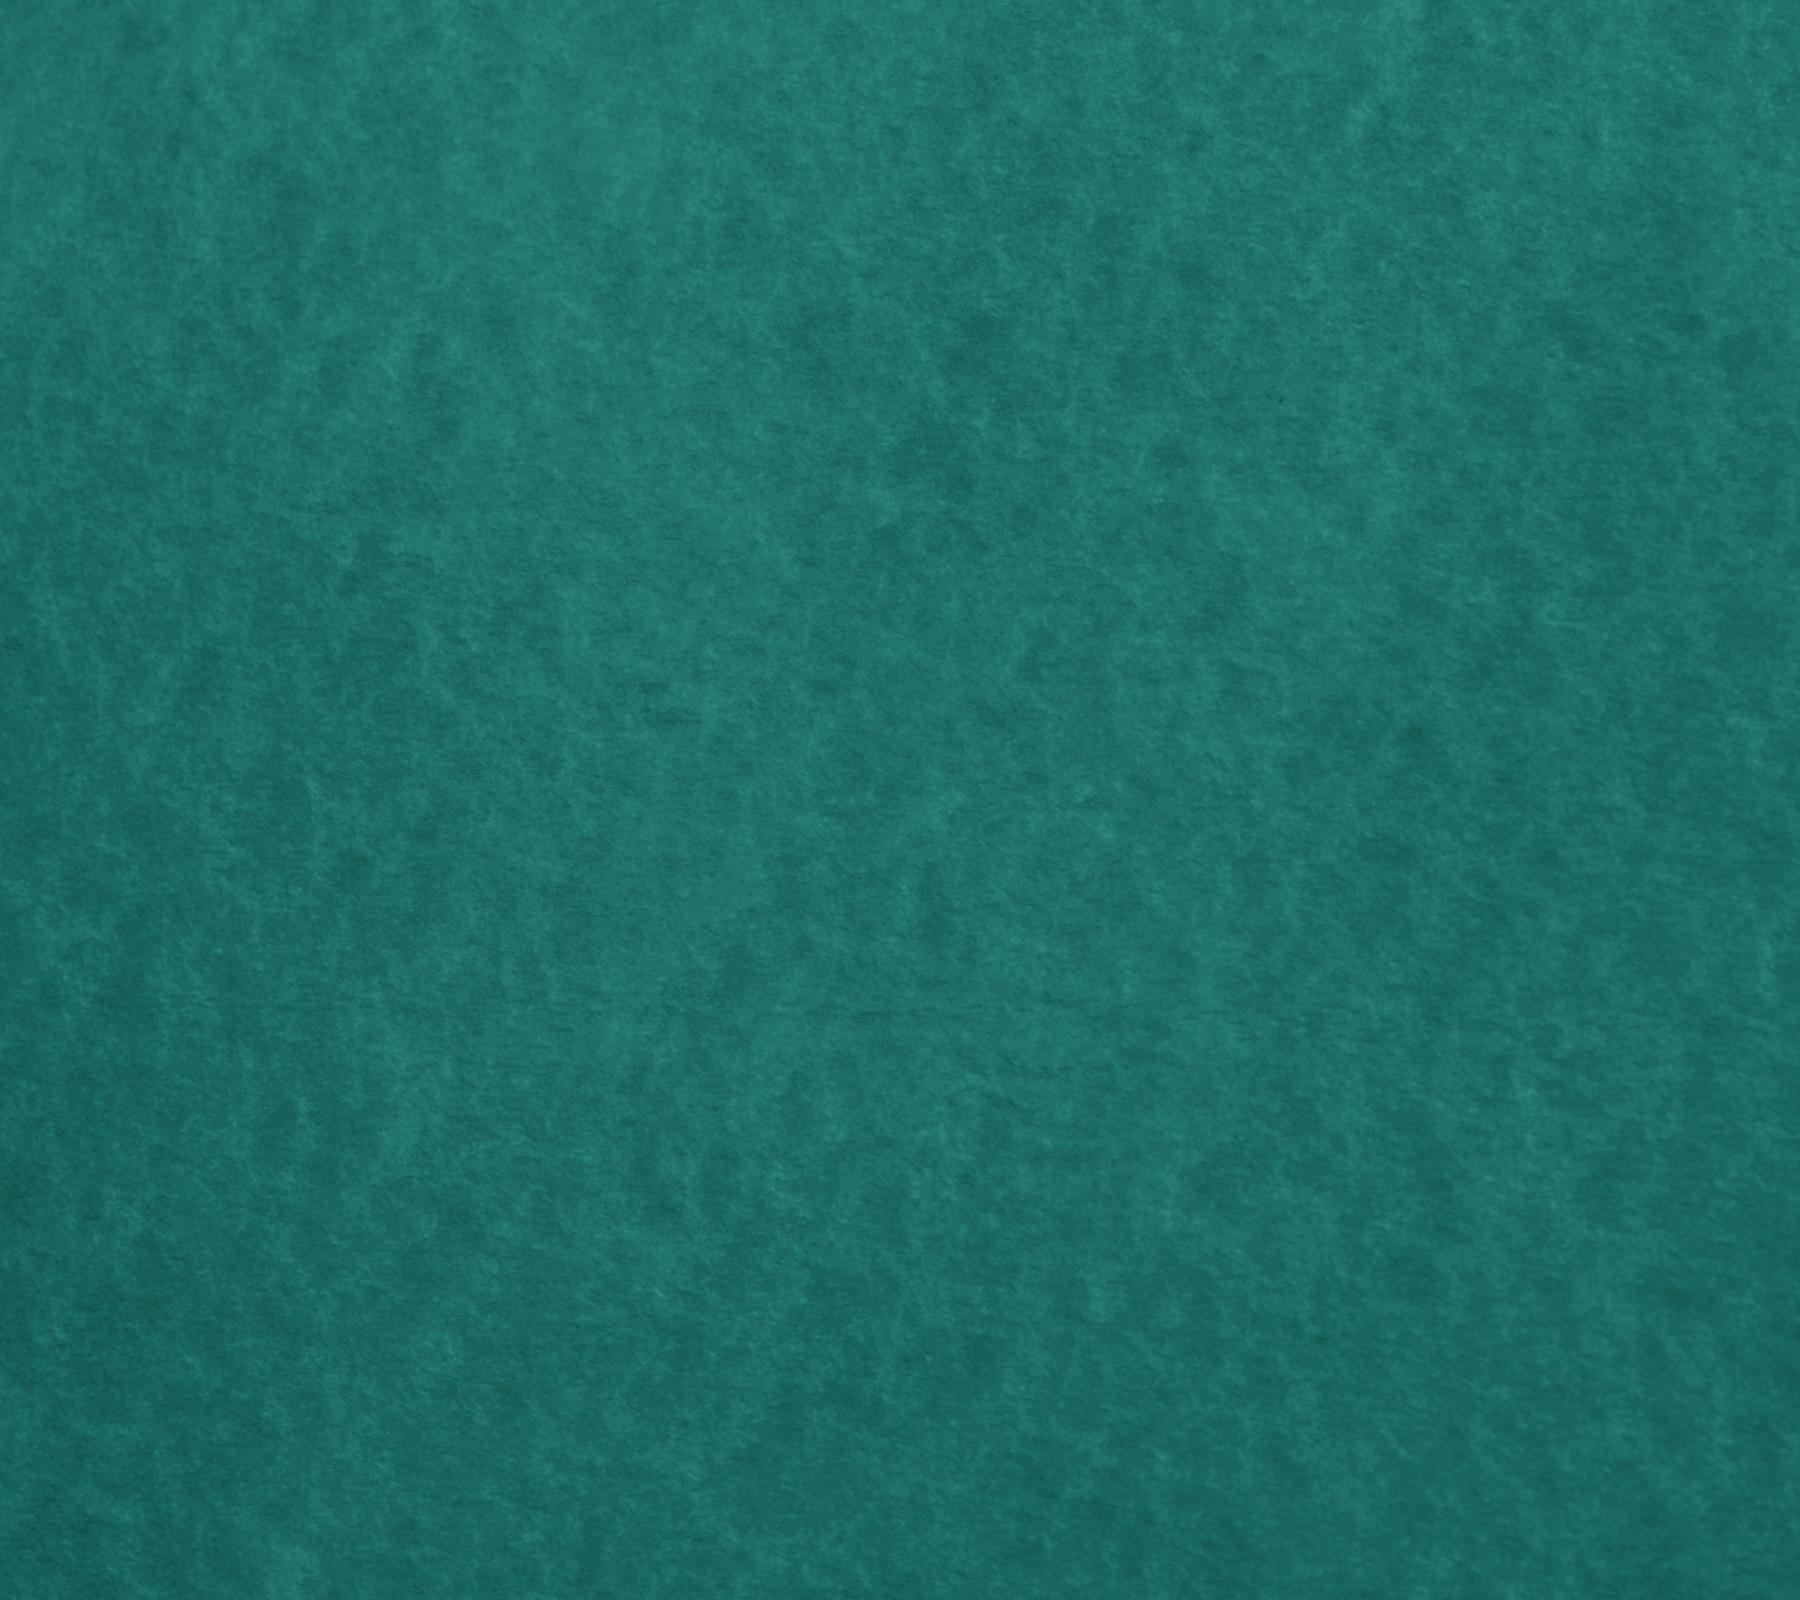 Teal Parchment Paper Background Image Wallpaper